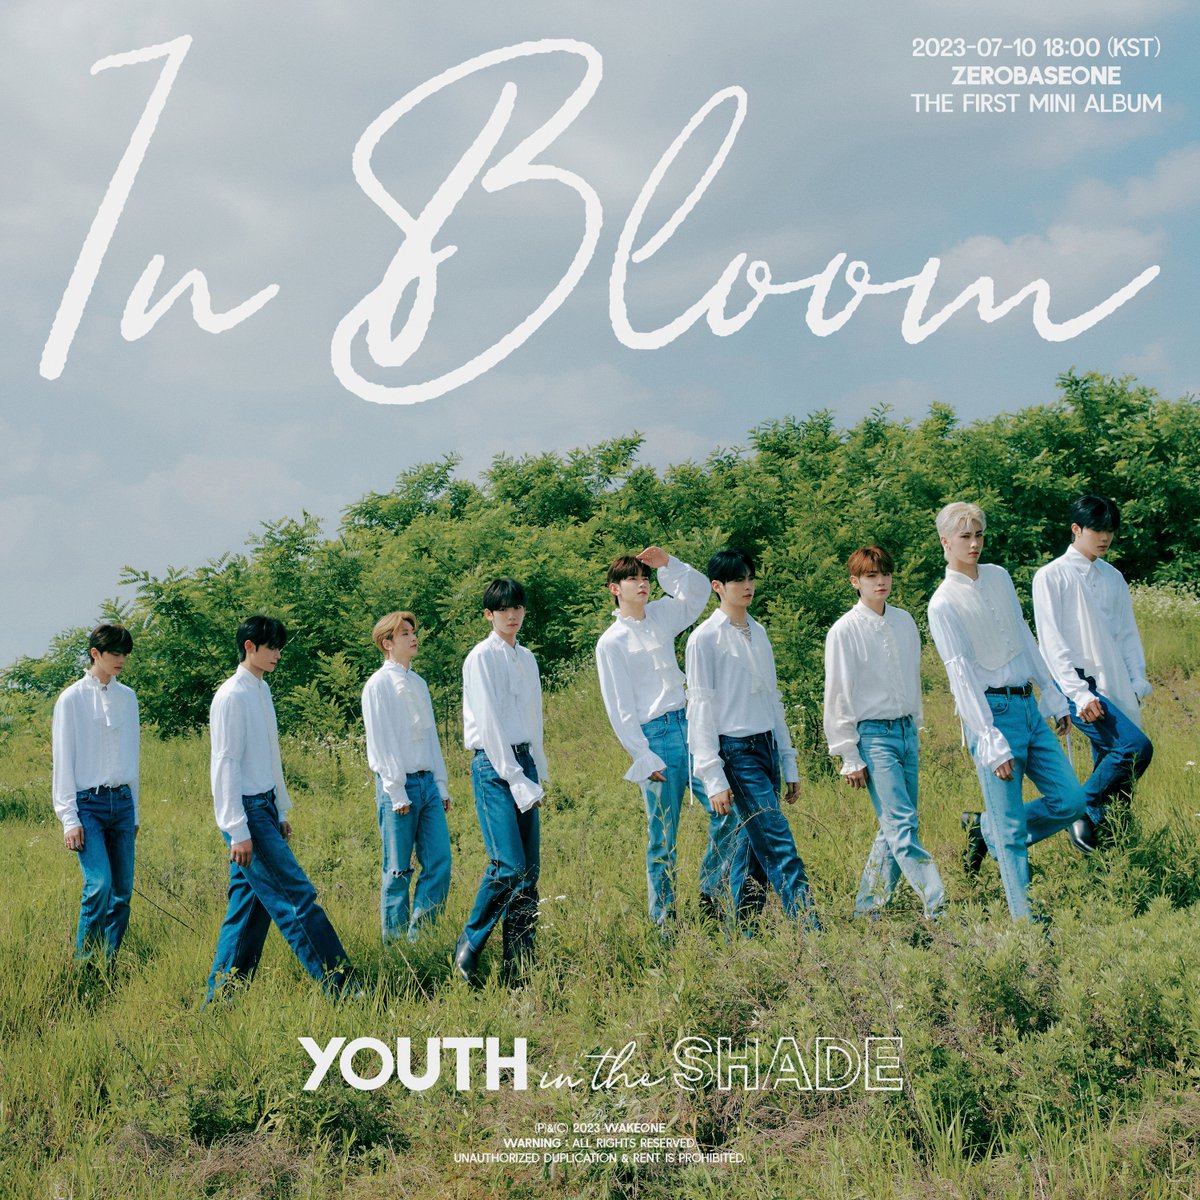 ZEROBASEONE The 1st Mini Album [𝐘𝐎𝐔𝐓𝐇 𝐈𝐍 𝐓𝐇𝐄 𝐒𝐇𝐀𝐃𝐄]

'In Bloom' Title Poster 🌹

2023.07.10 18:00 (KST)

#ZEROBASEONE #ZB1
#제로베이스원
#YOUTHINTHESHADE #InBloom